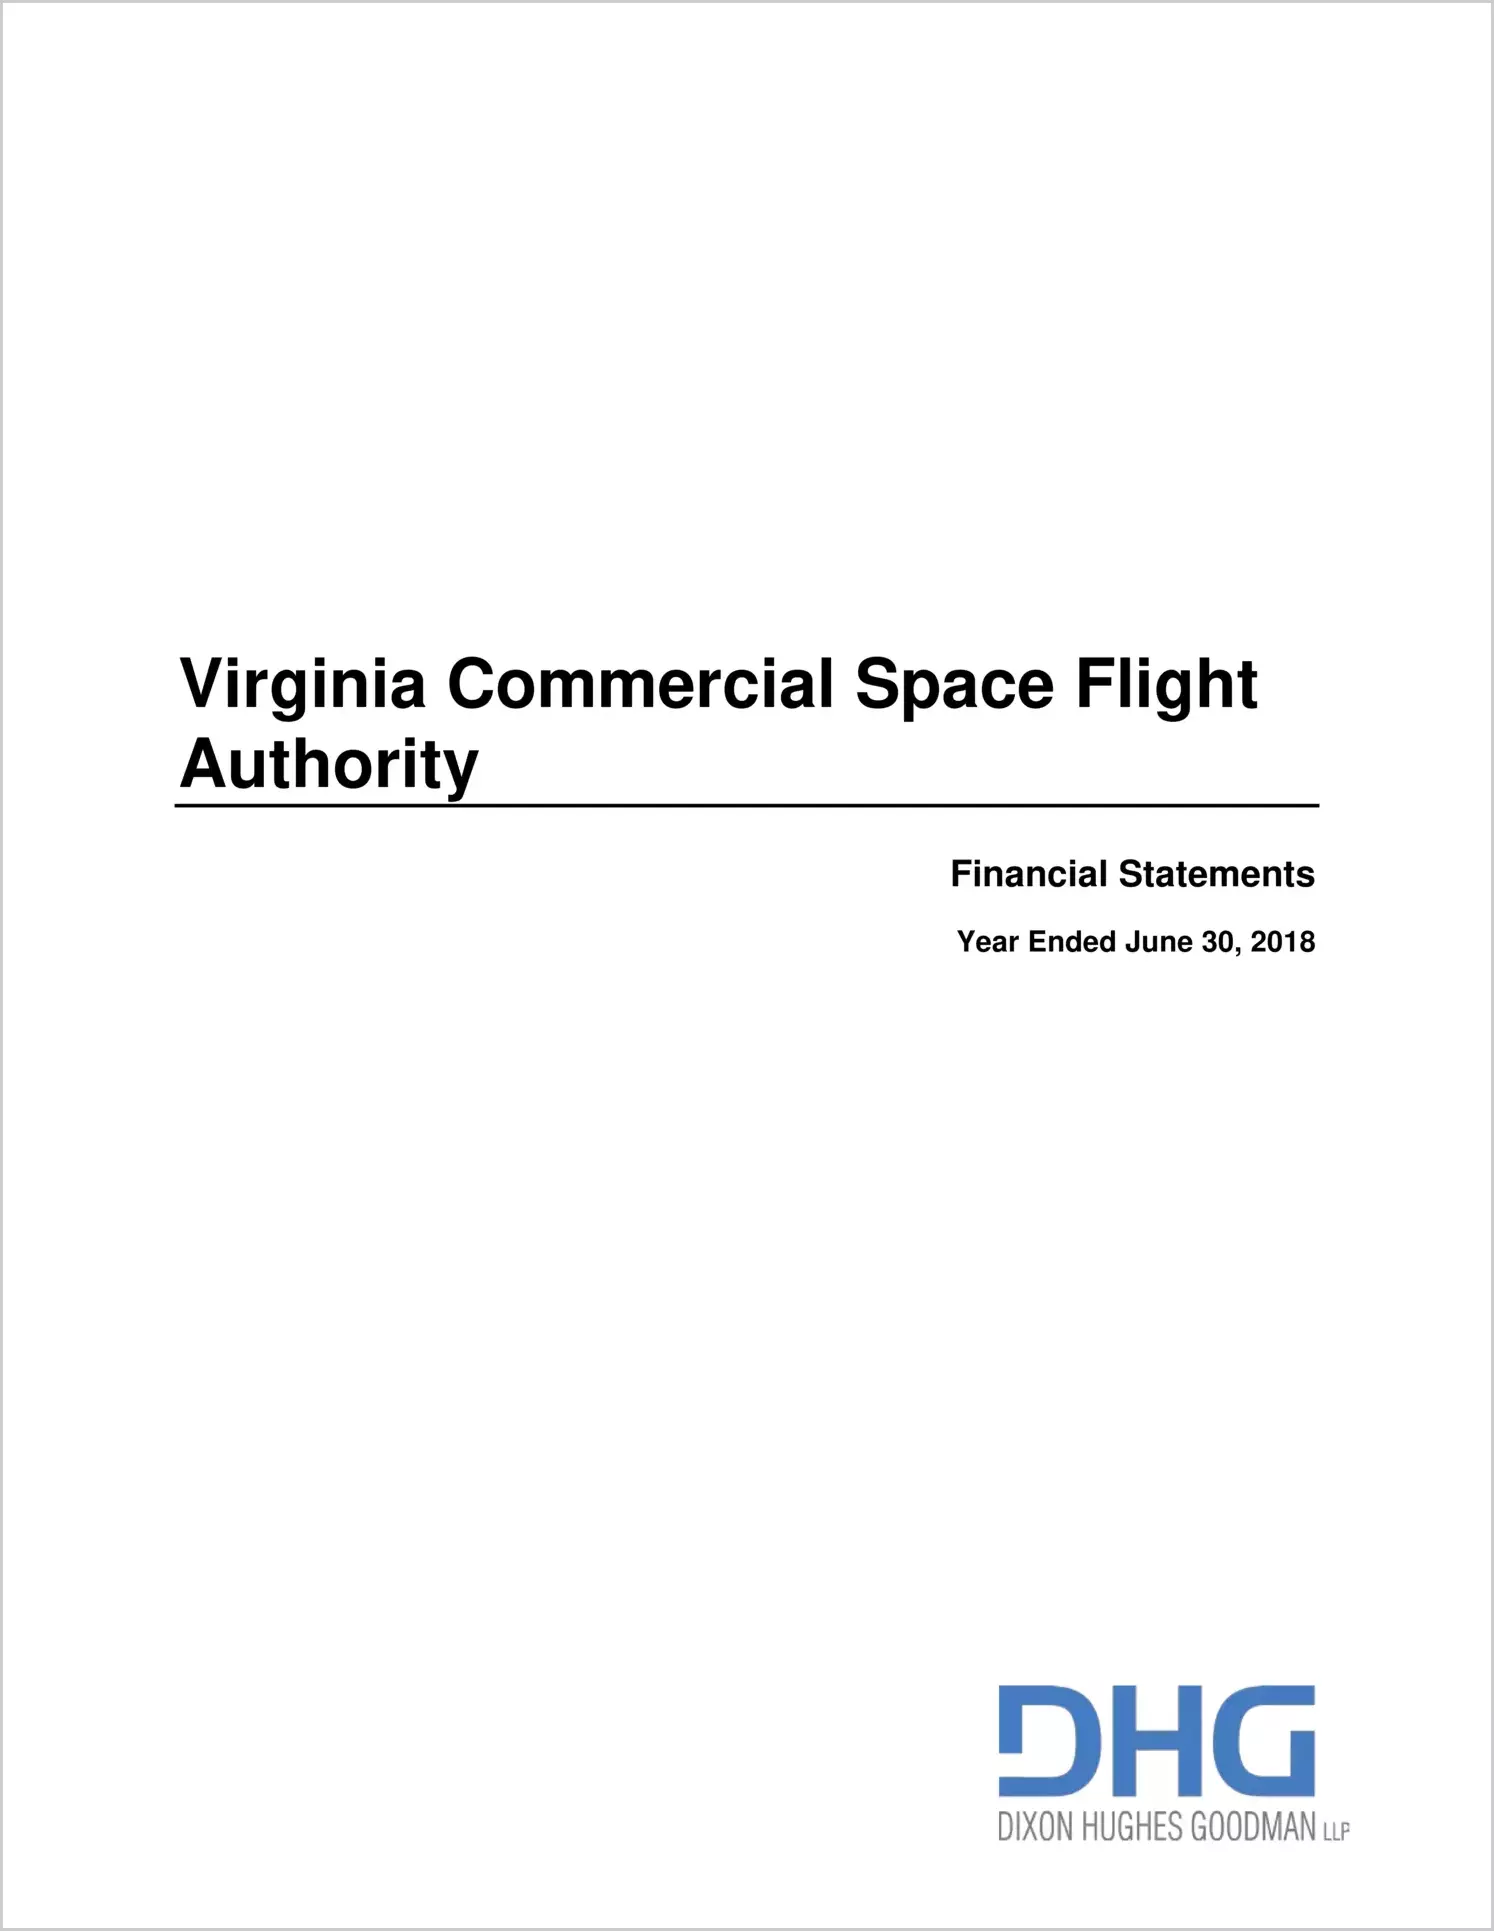 Virginia Commercial Space Flight Authority Financial Statements for the year ended June 30, 2018